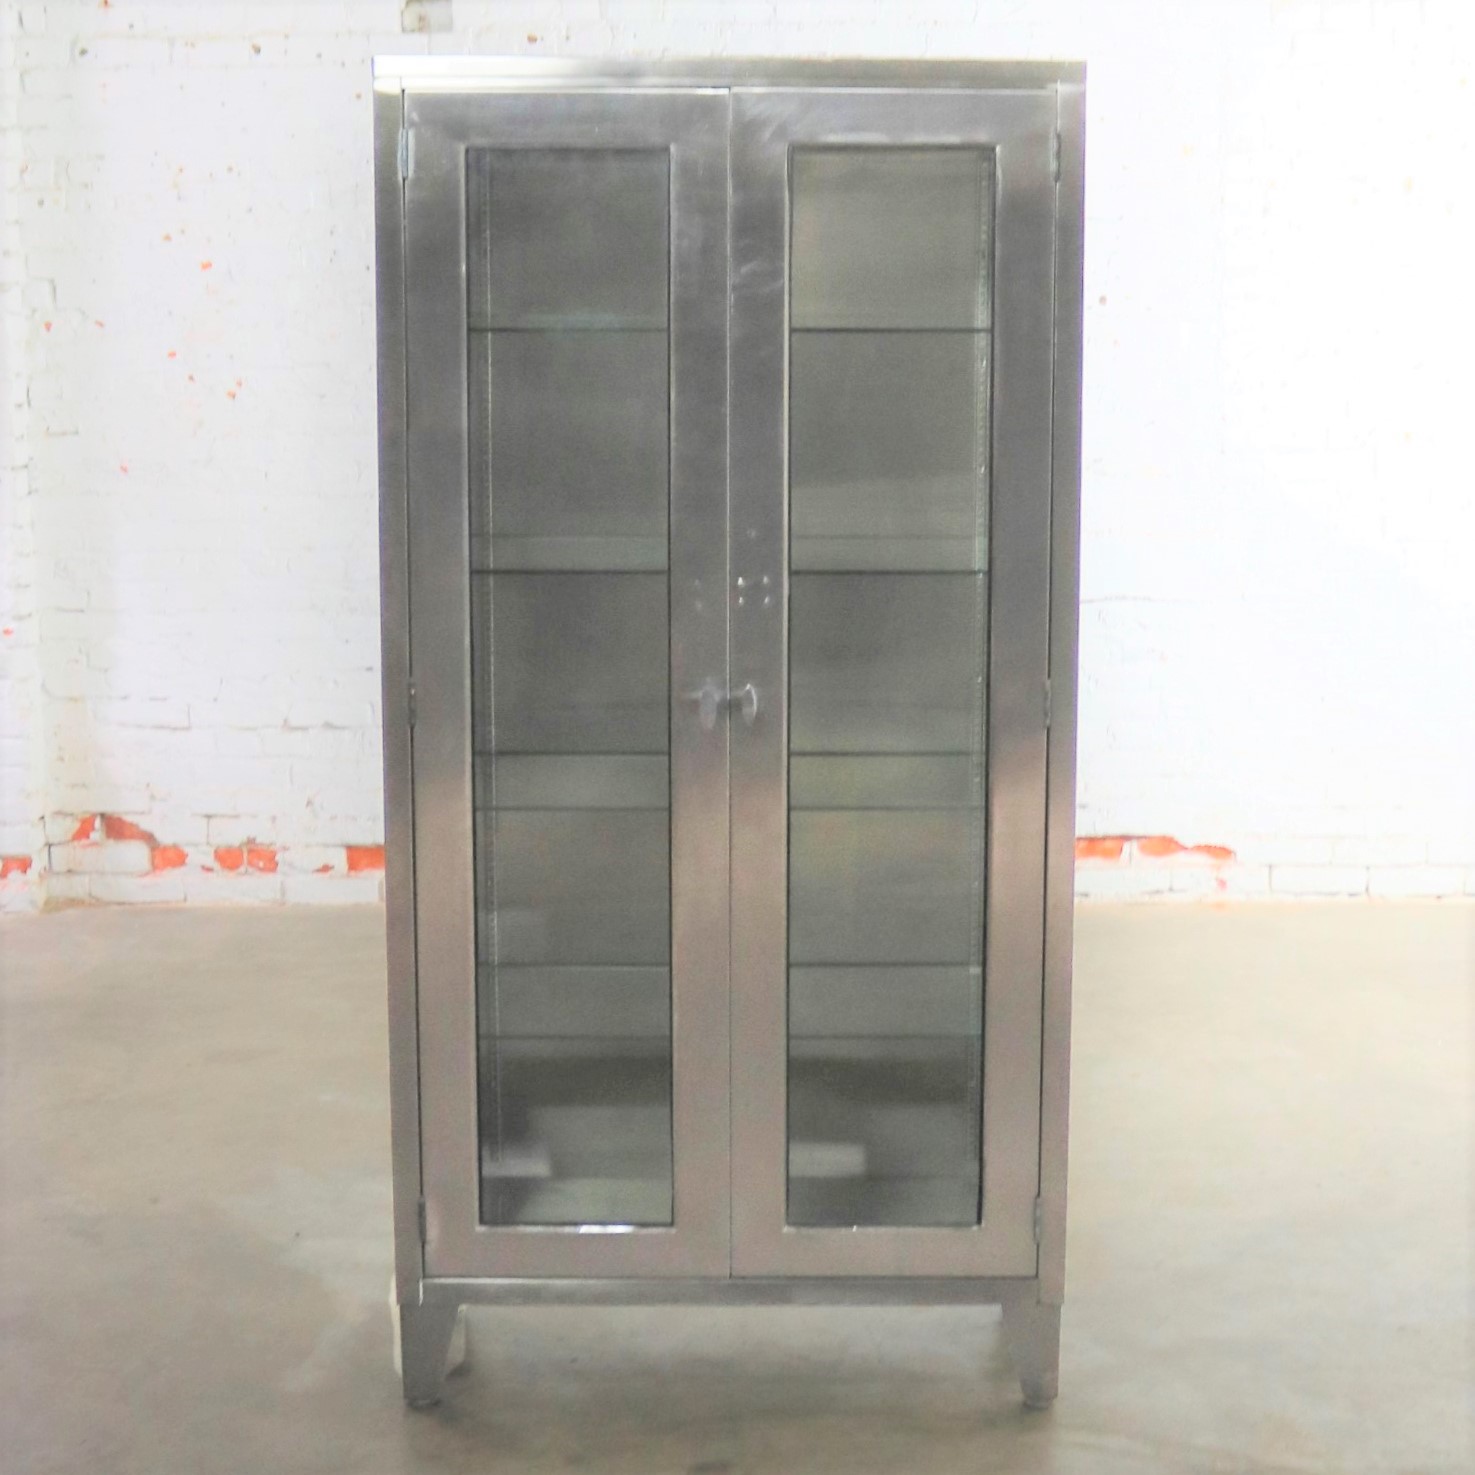 Vintage Stainless Steel Industrial Display Apothecary Medical Cabinet with Glass Doors and Shelves-6